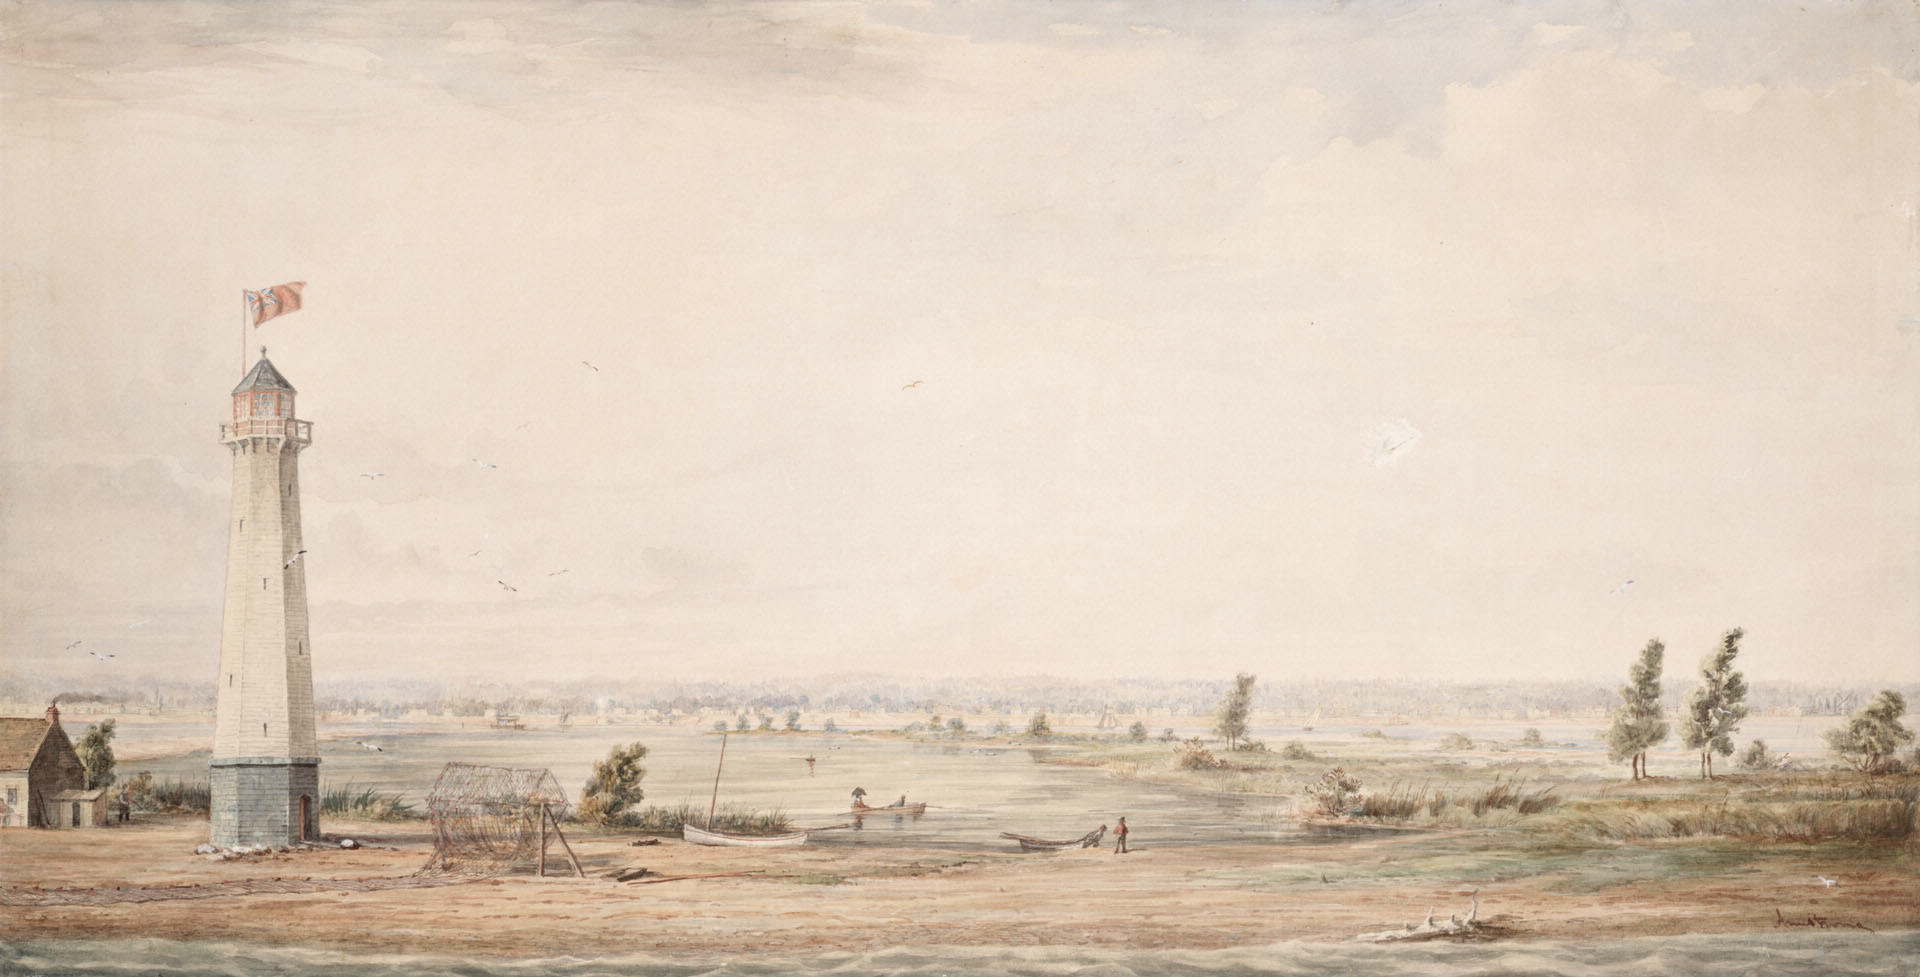 Painting depicting a view of Centre Island from near the lighthouse in 1817